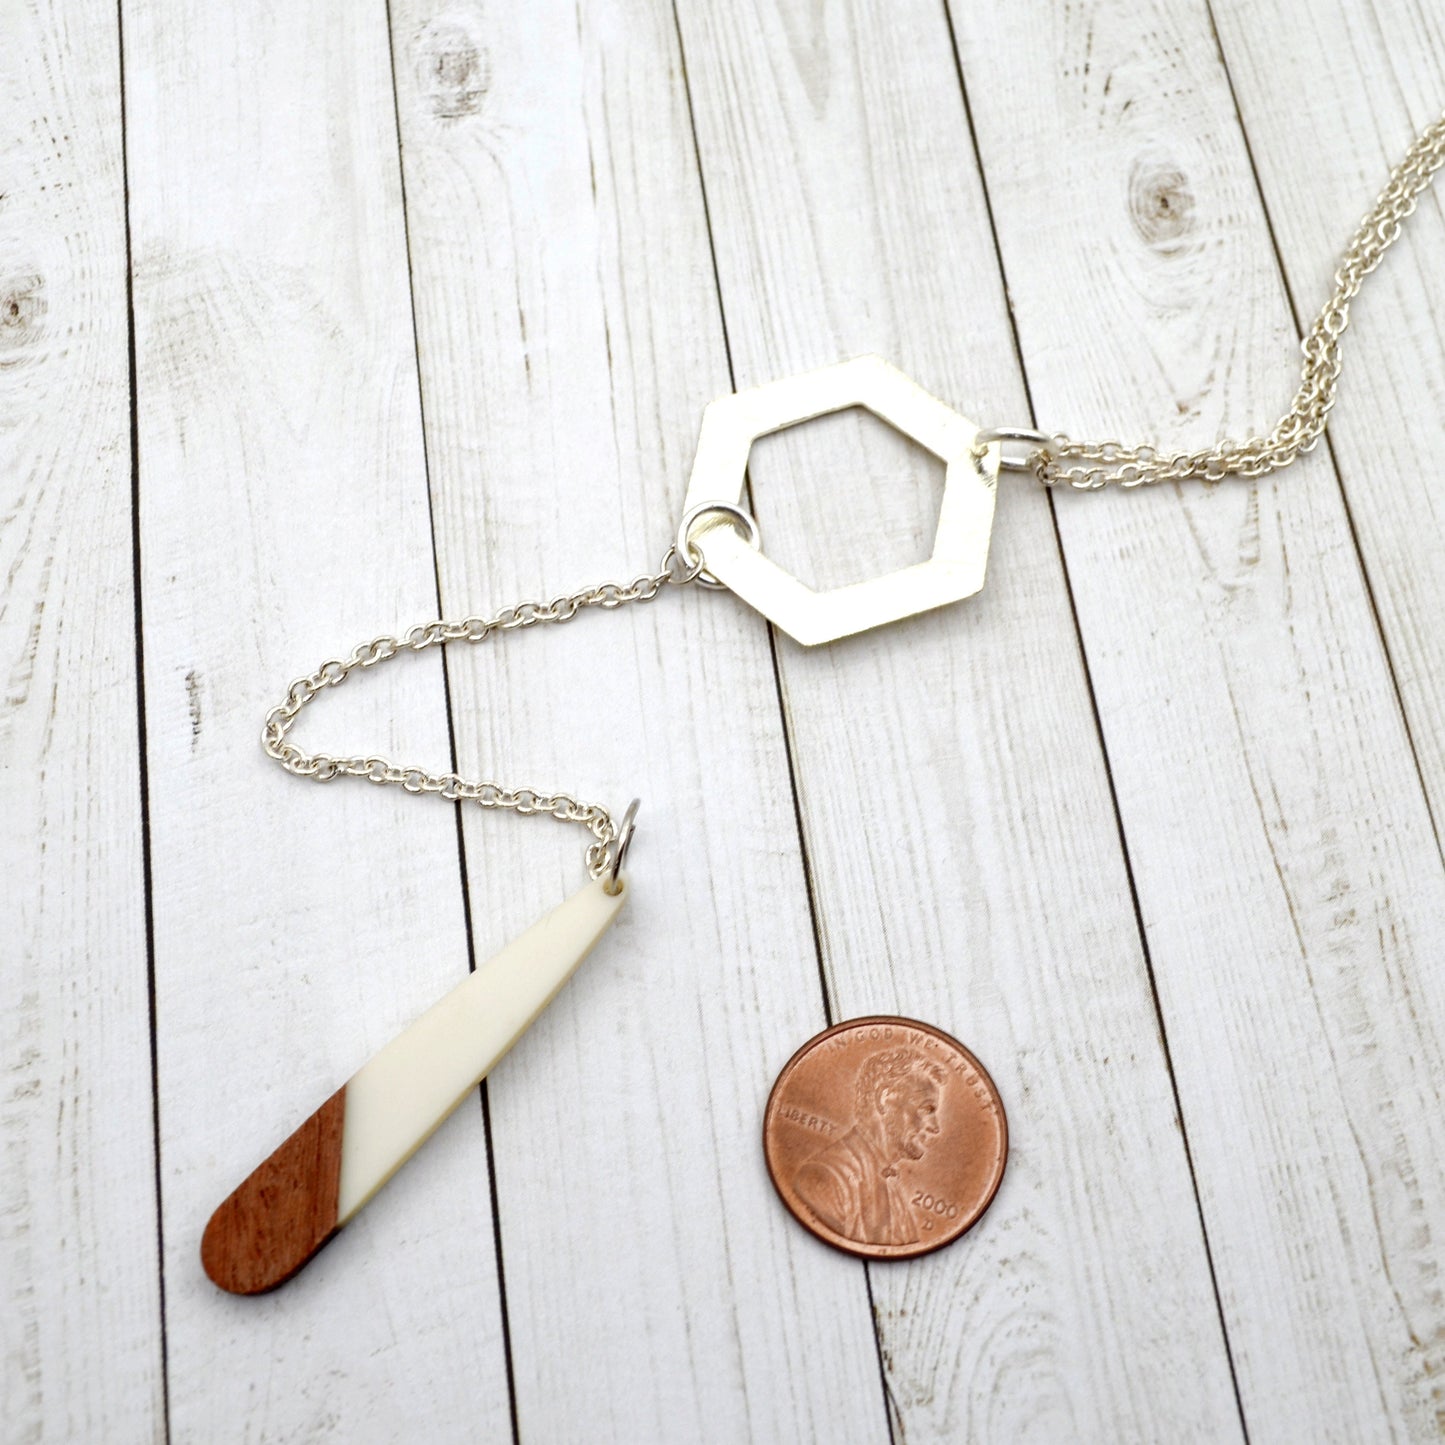 SALE White and Walnut Resin Necklace